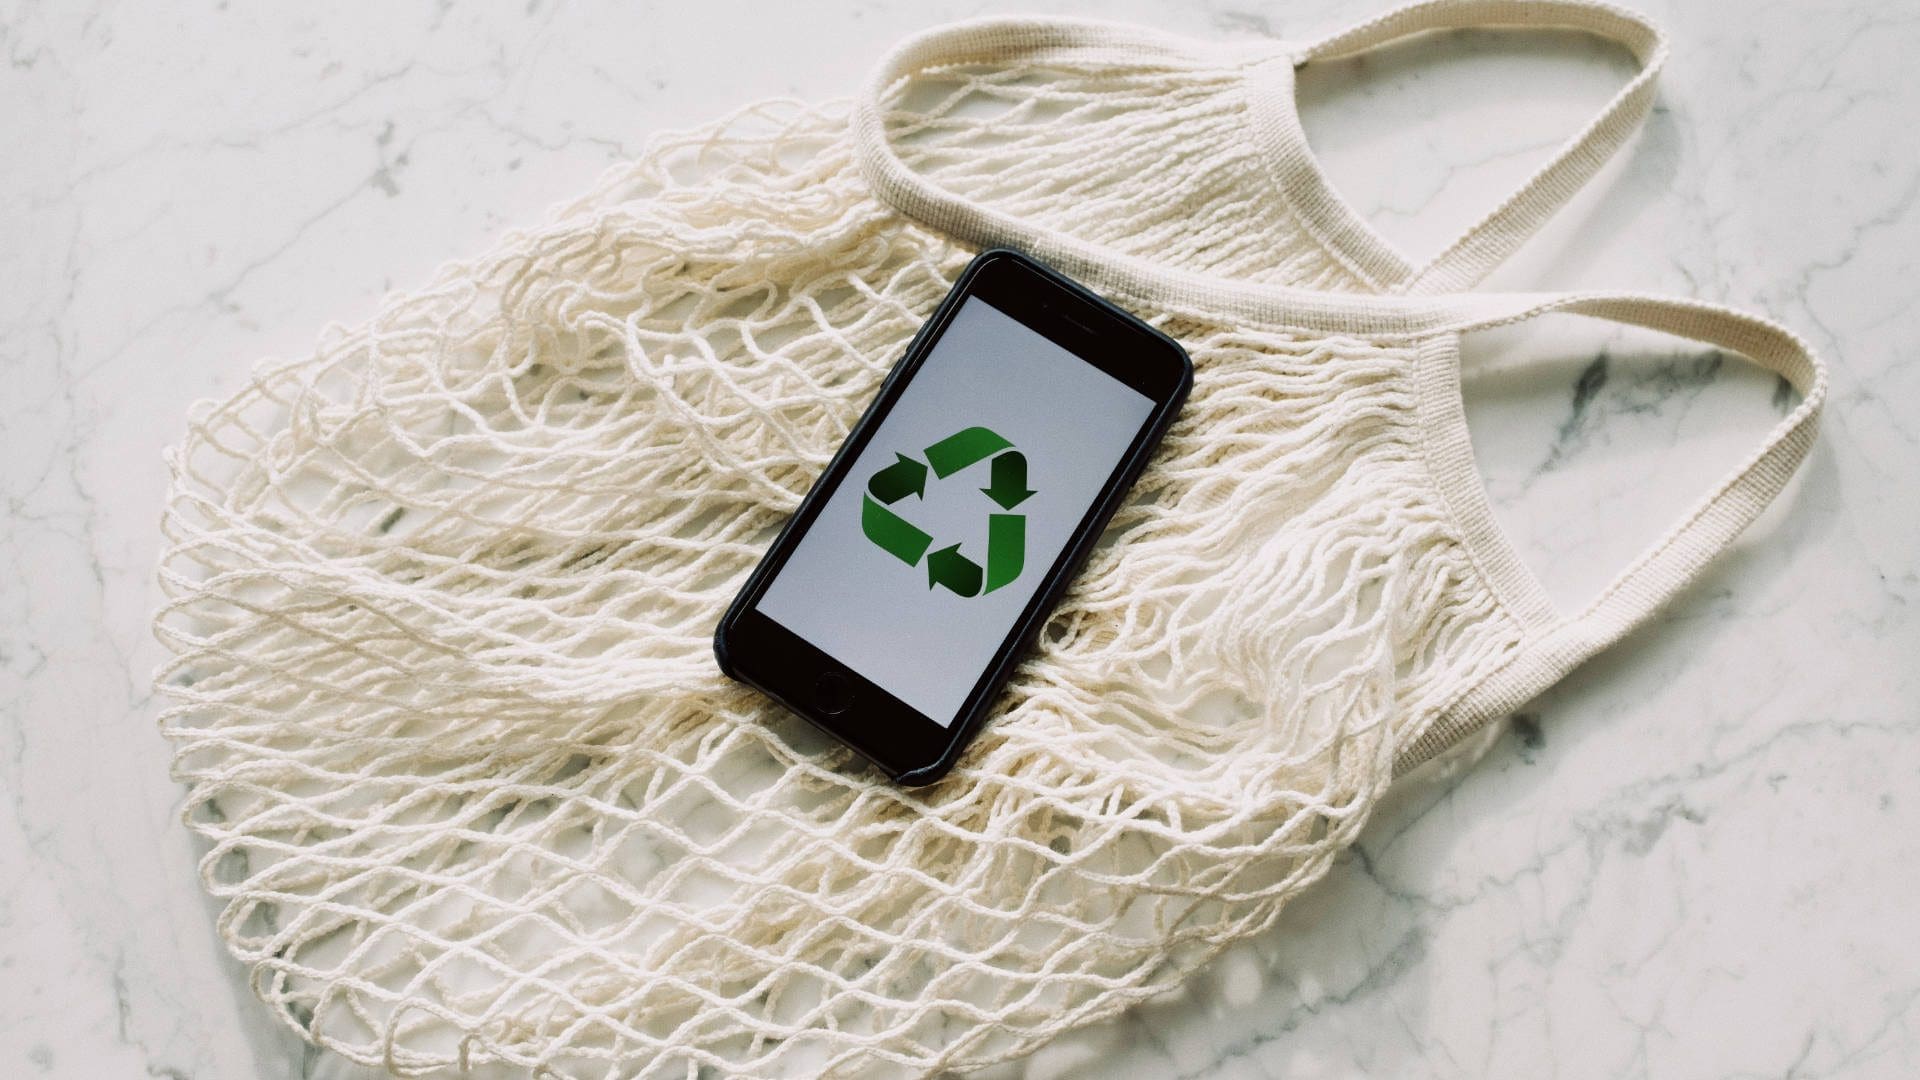 Textile recycling has a number of benefits for the company's that implement it.